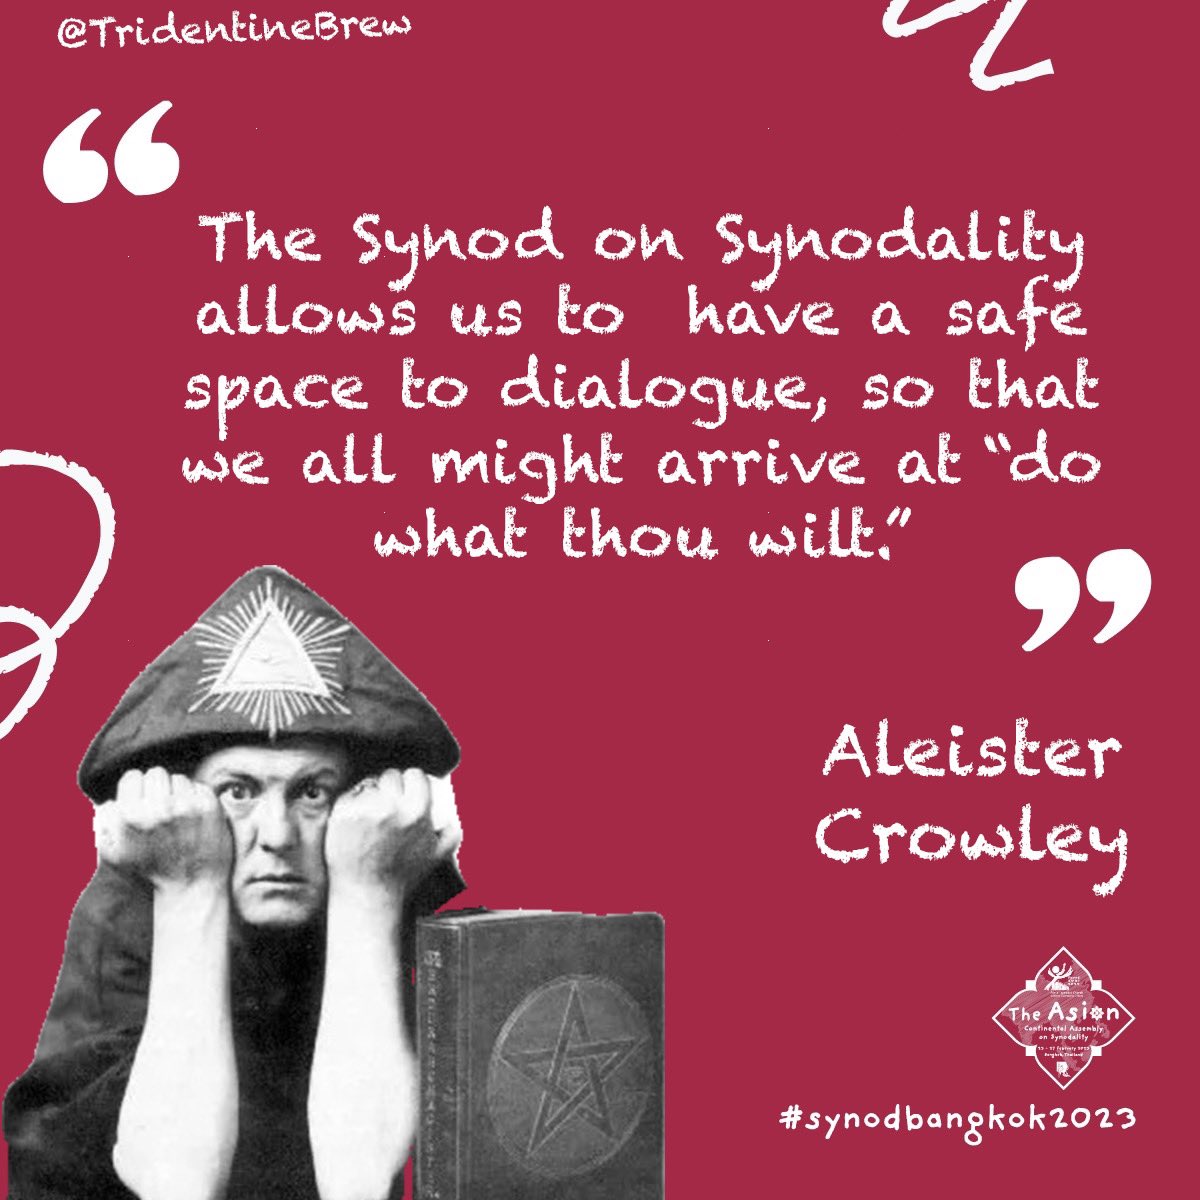 Aleister Crowley shares the key insight he has gained working with the Synod on Synodality!👇 

#ListeningChurch #SynodalerWeg #Synod #WalkingTogether @Synod_va #parody